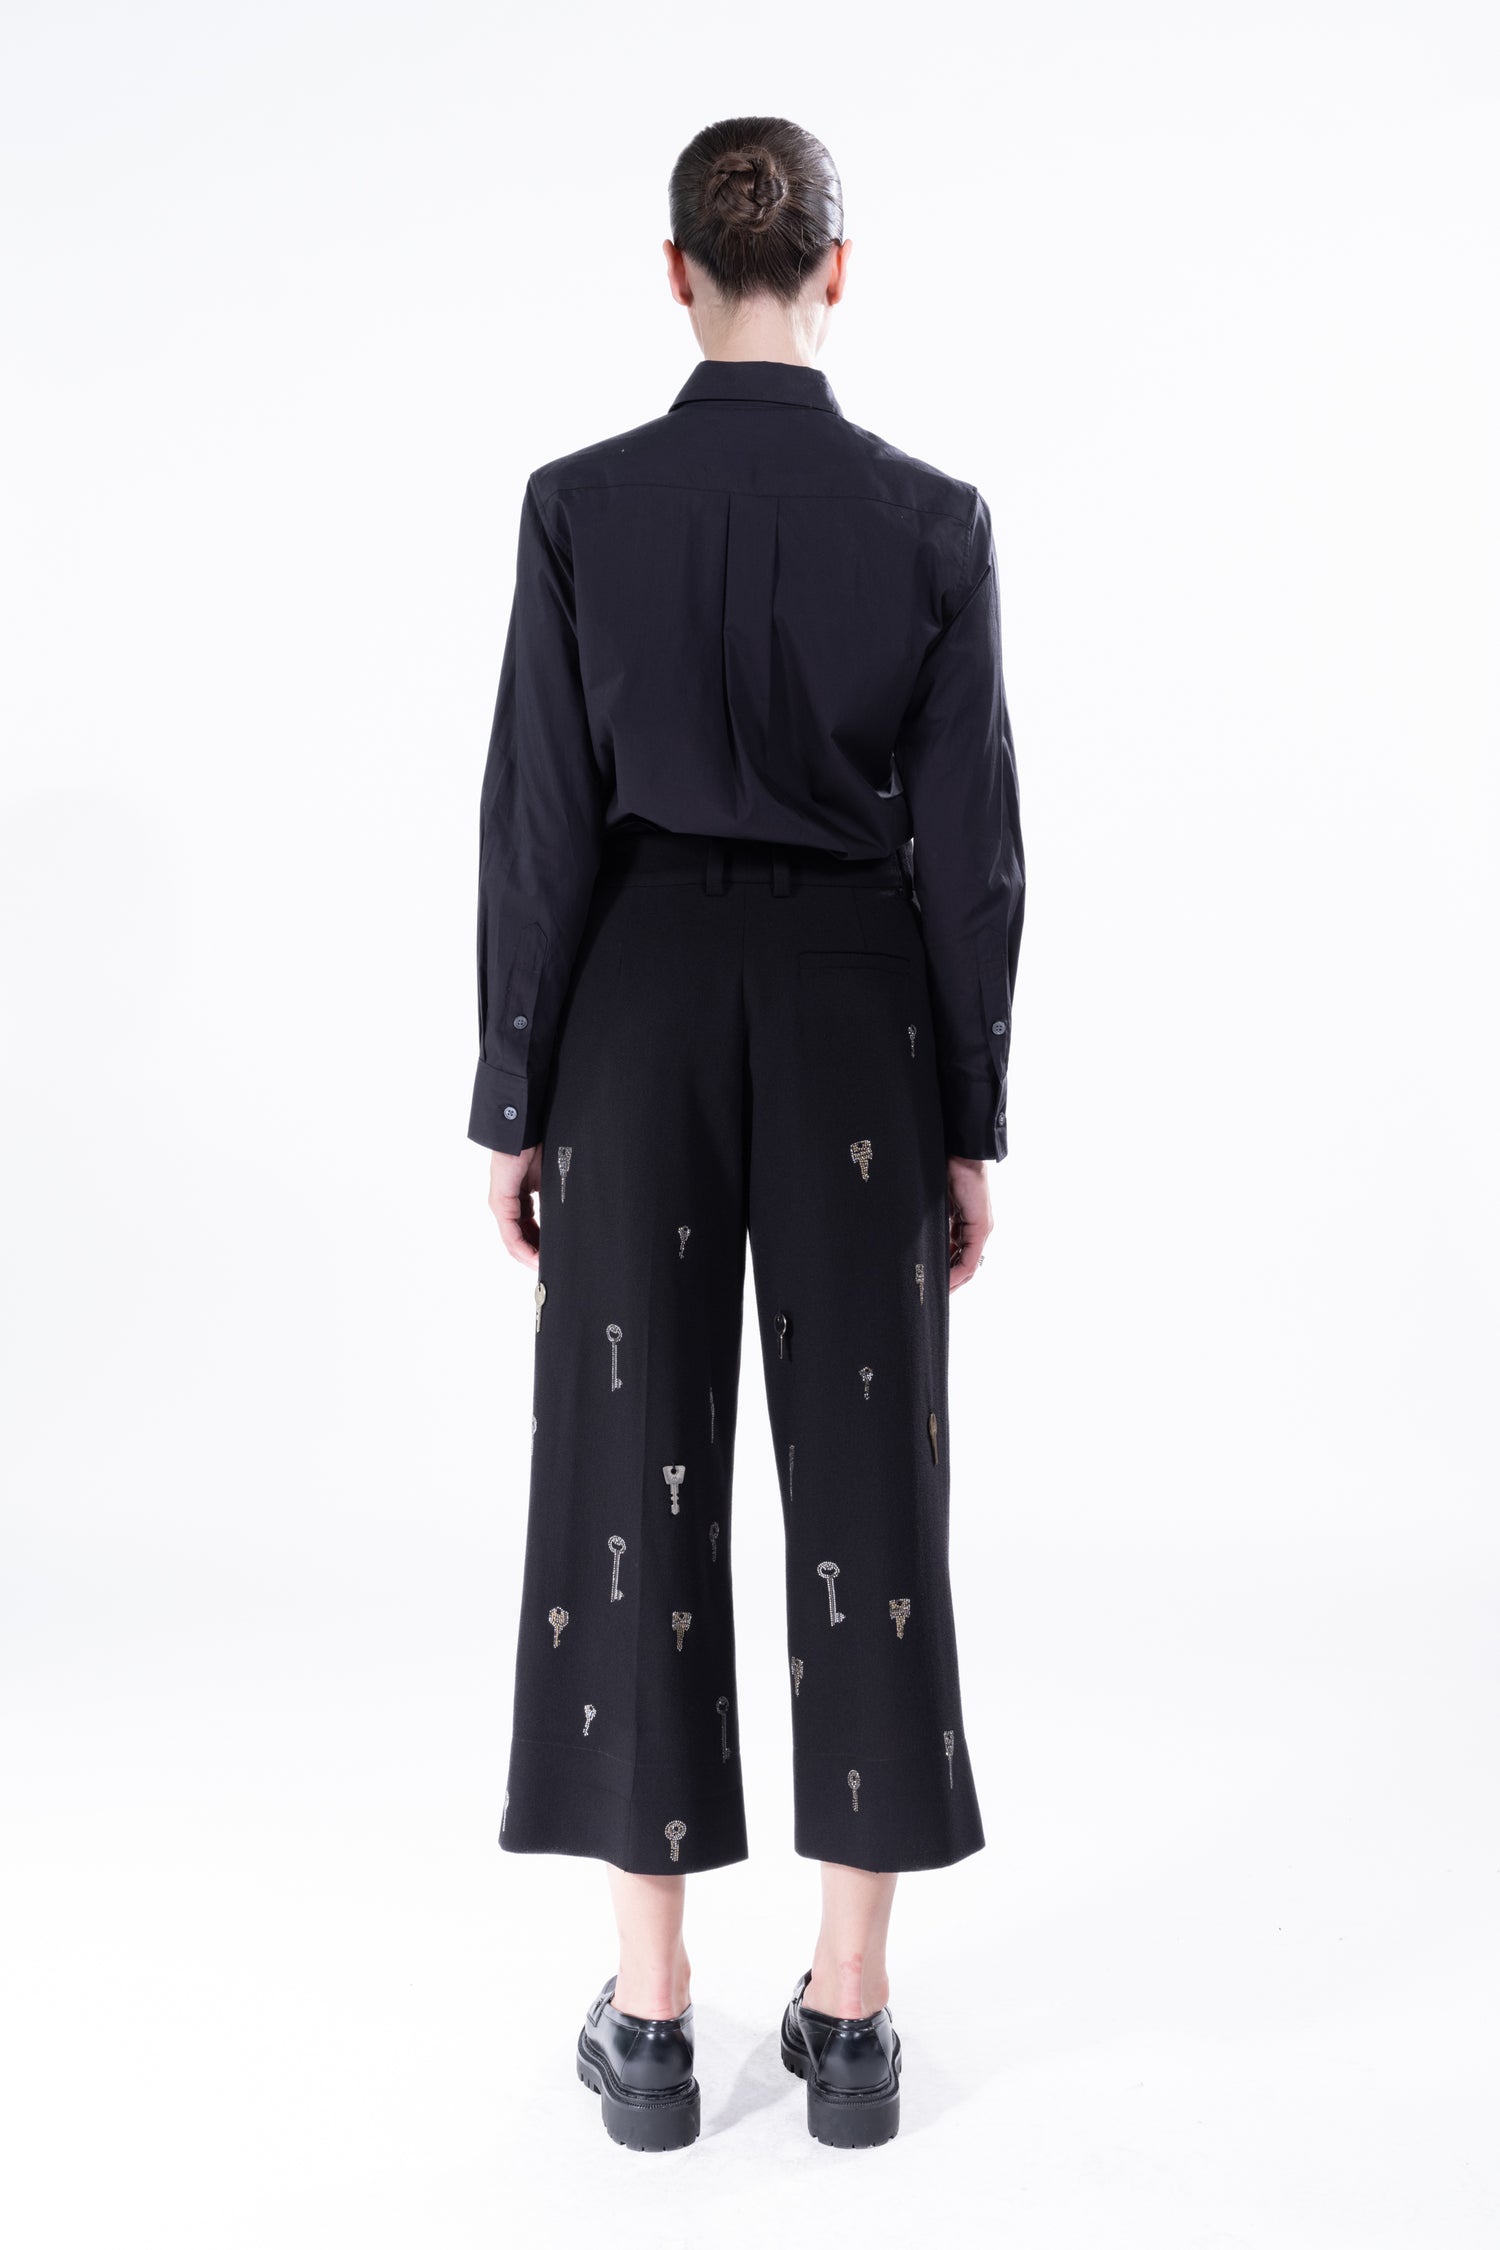 'KEY PARTY' CROPPED PLEATED PANTS -  - Libertine